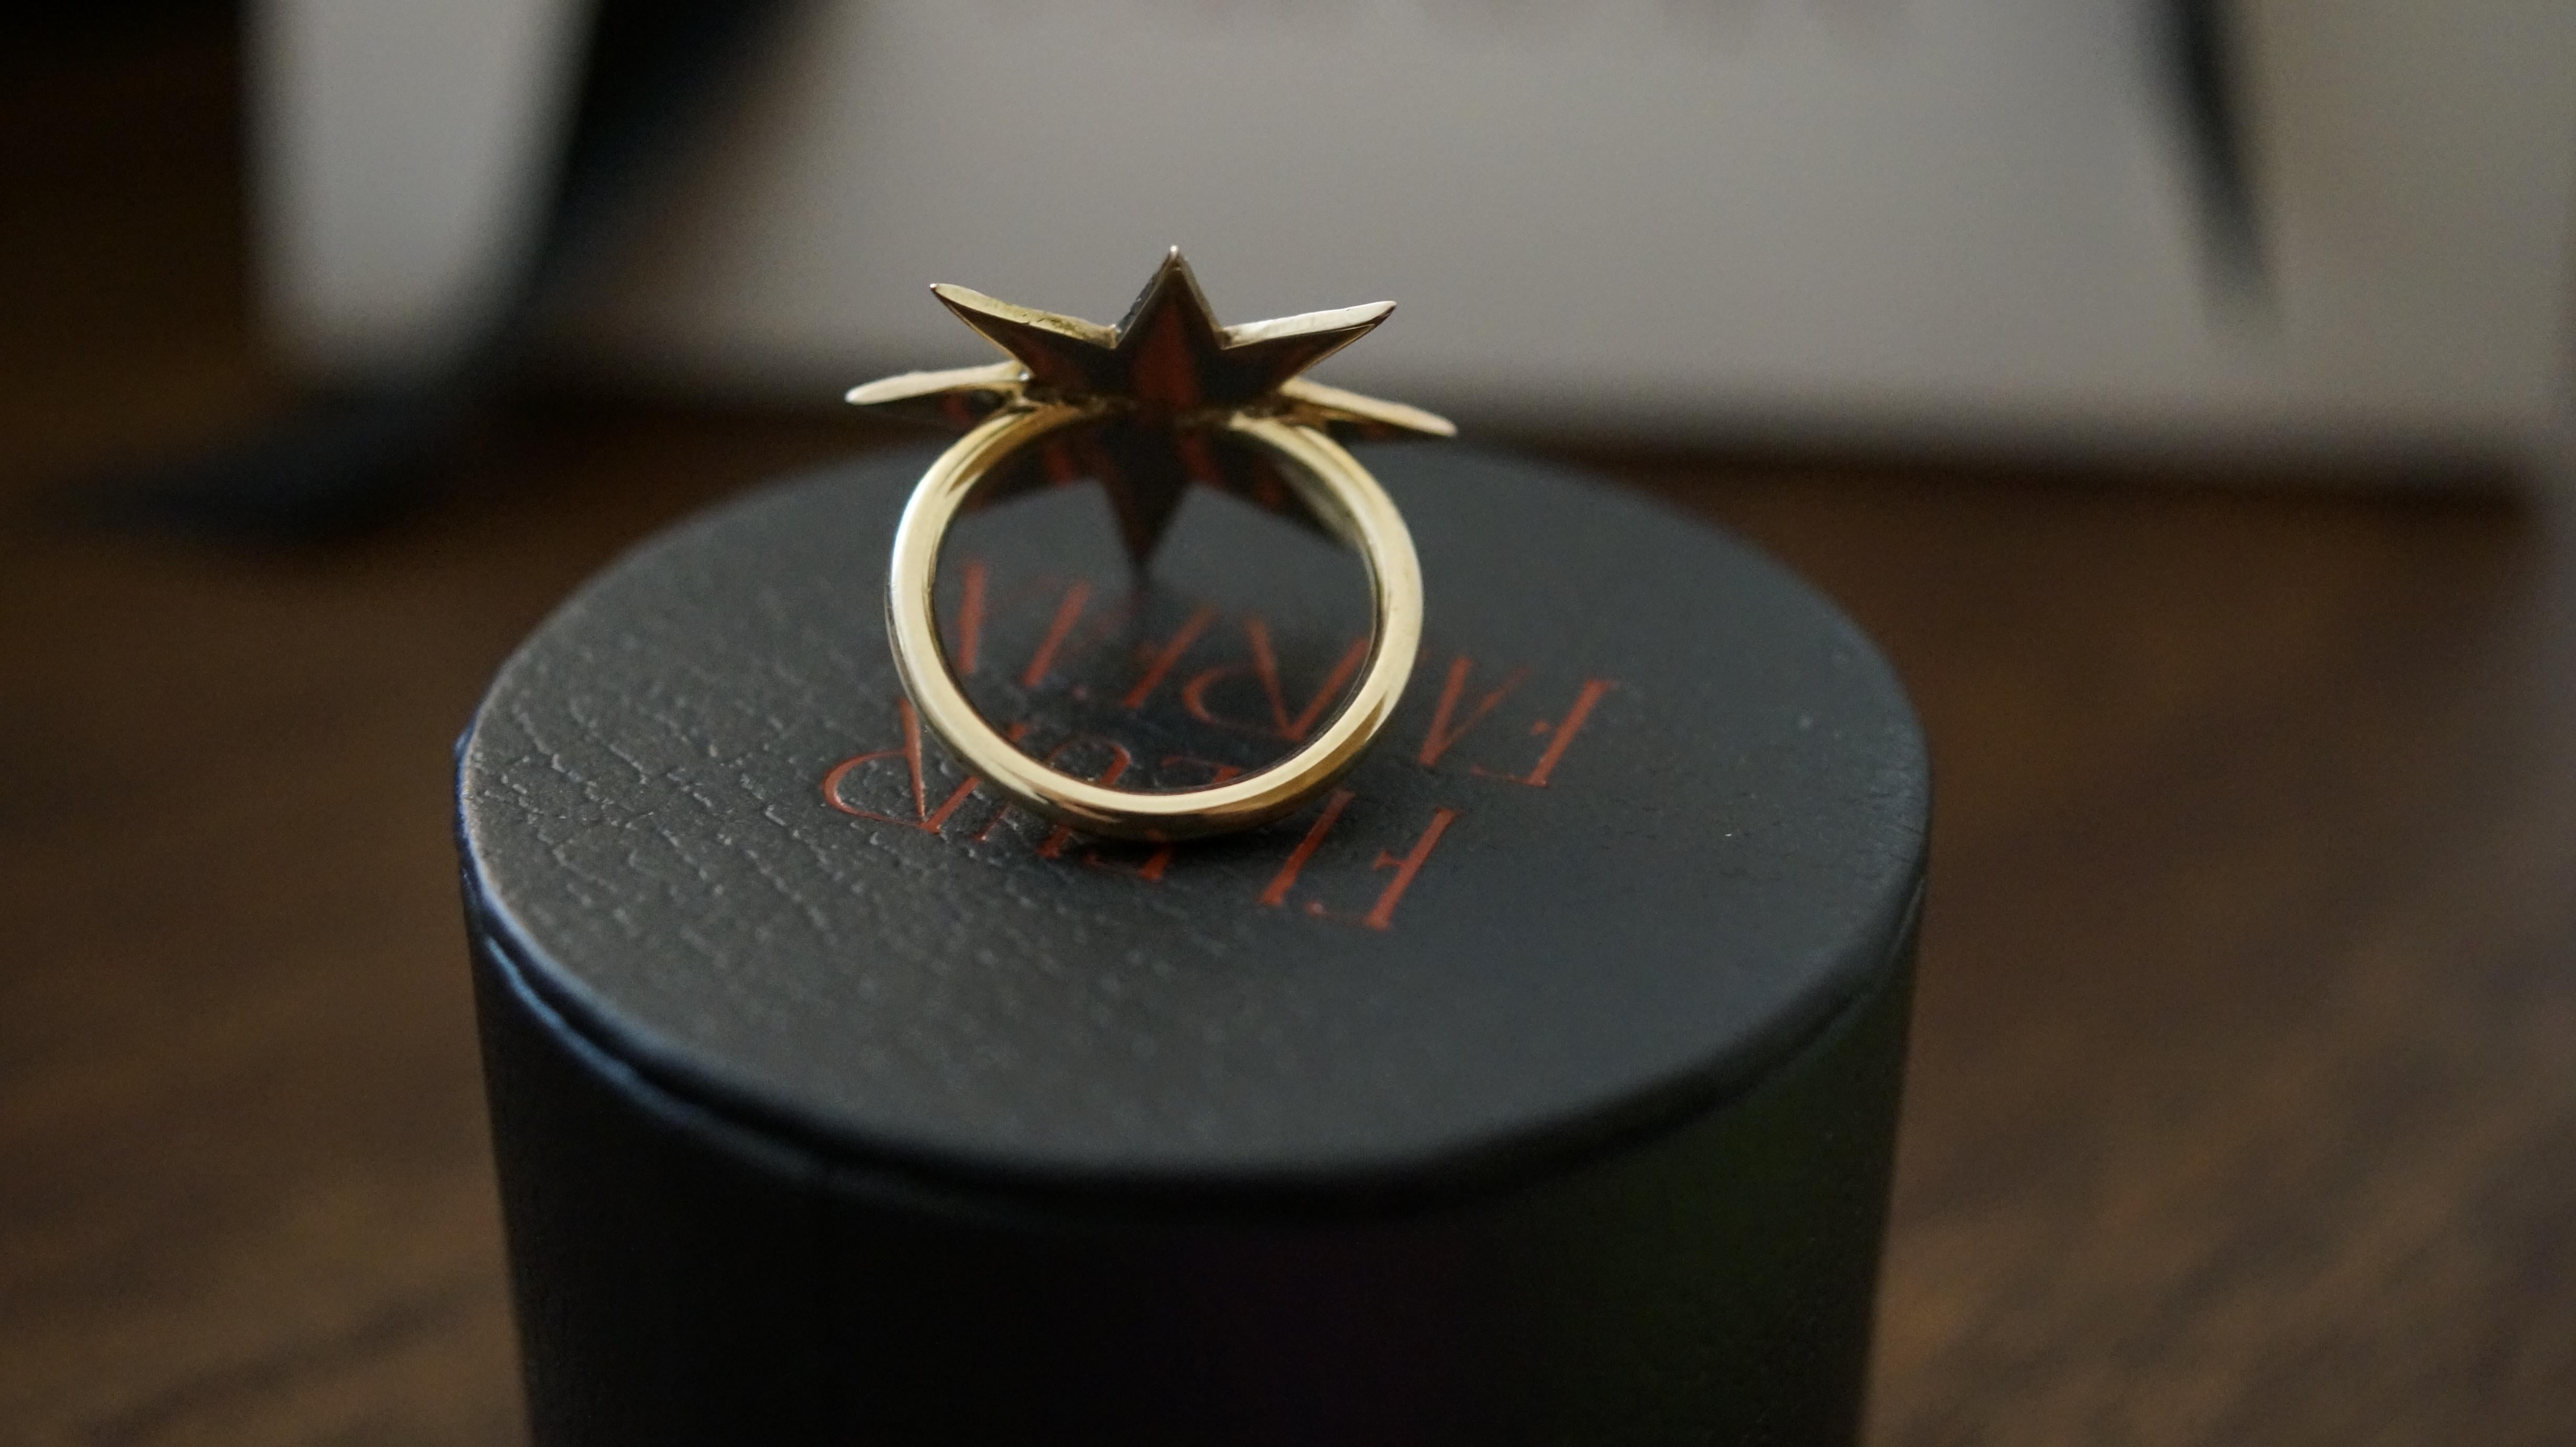 Diamond Star Ring - Georgian Conversion Piece (C.1813) - US 5.5 In Good Condition For Sale In Stroud, GB